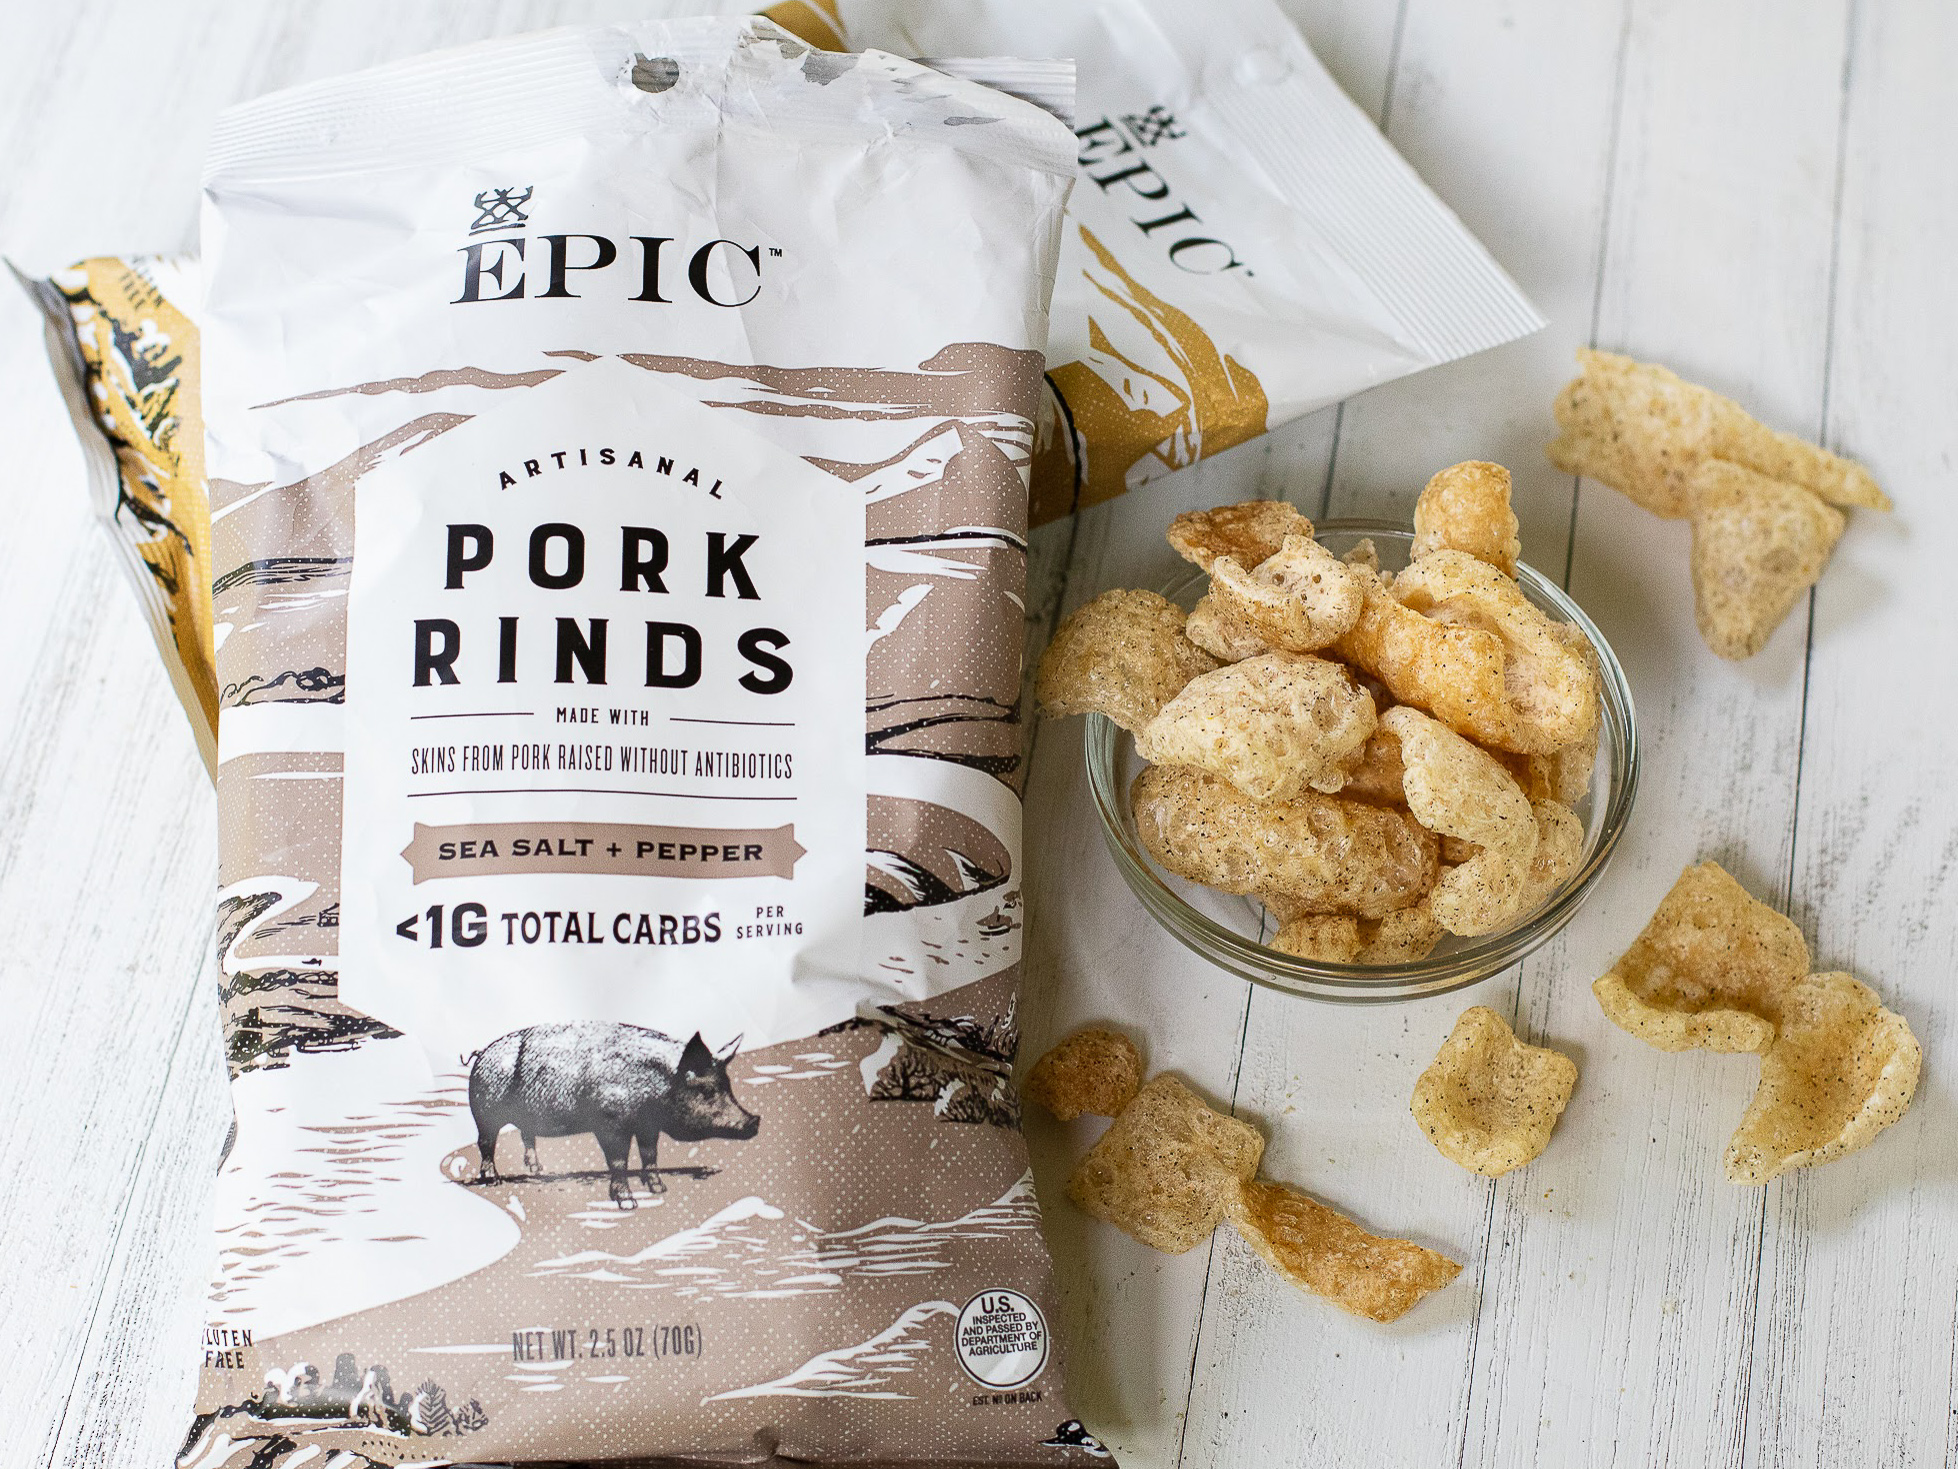 Epic Pork Rinds Just $1.85 At Publix – Less Than Half Price